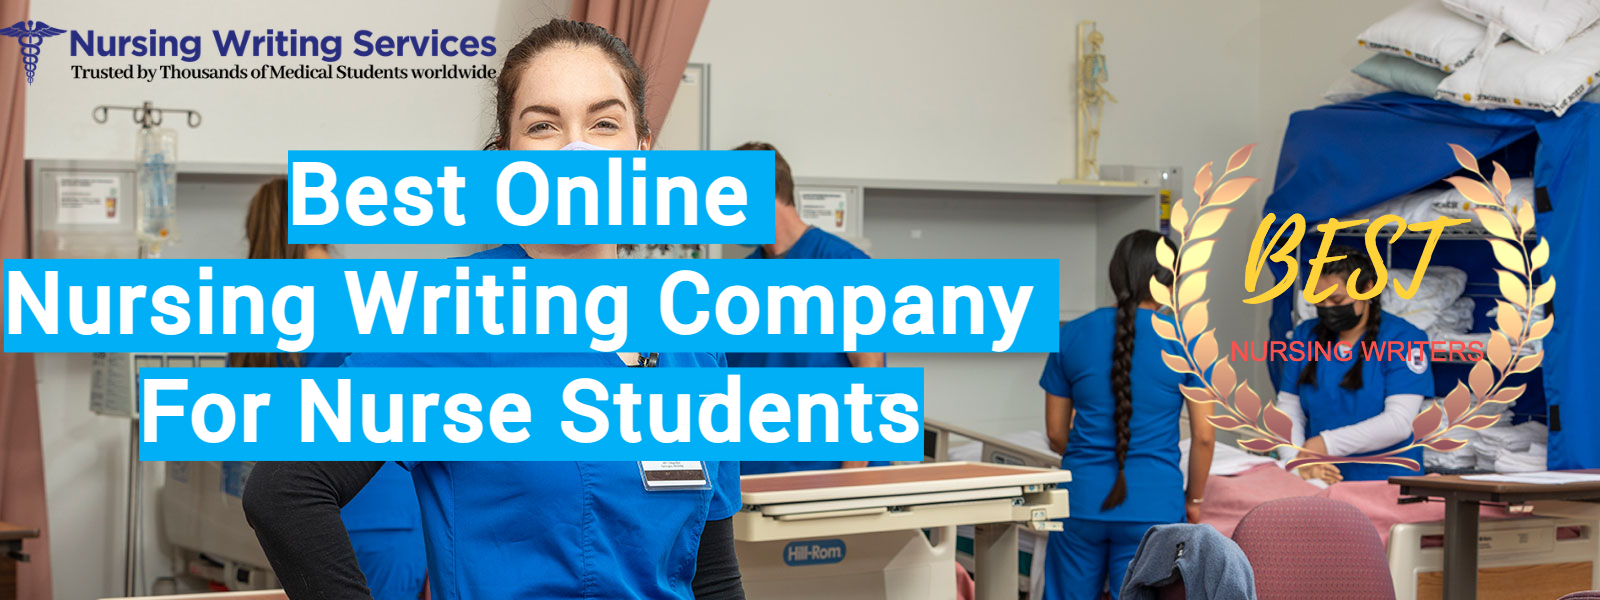 Why We Are The Best Online Nursing Writing Company For Nurse Students